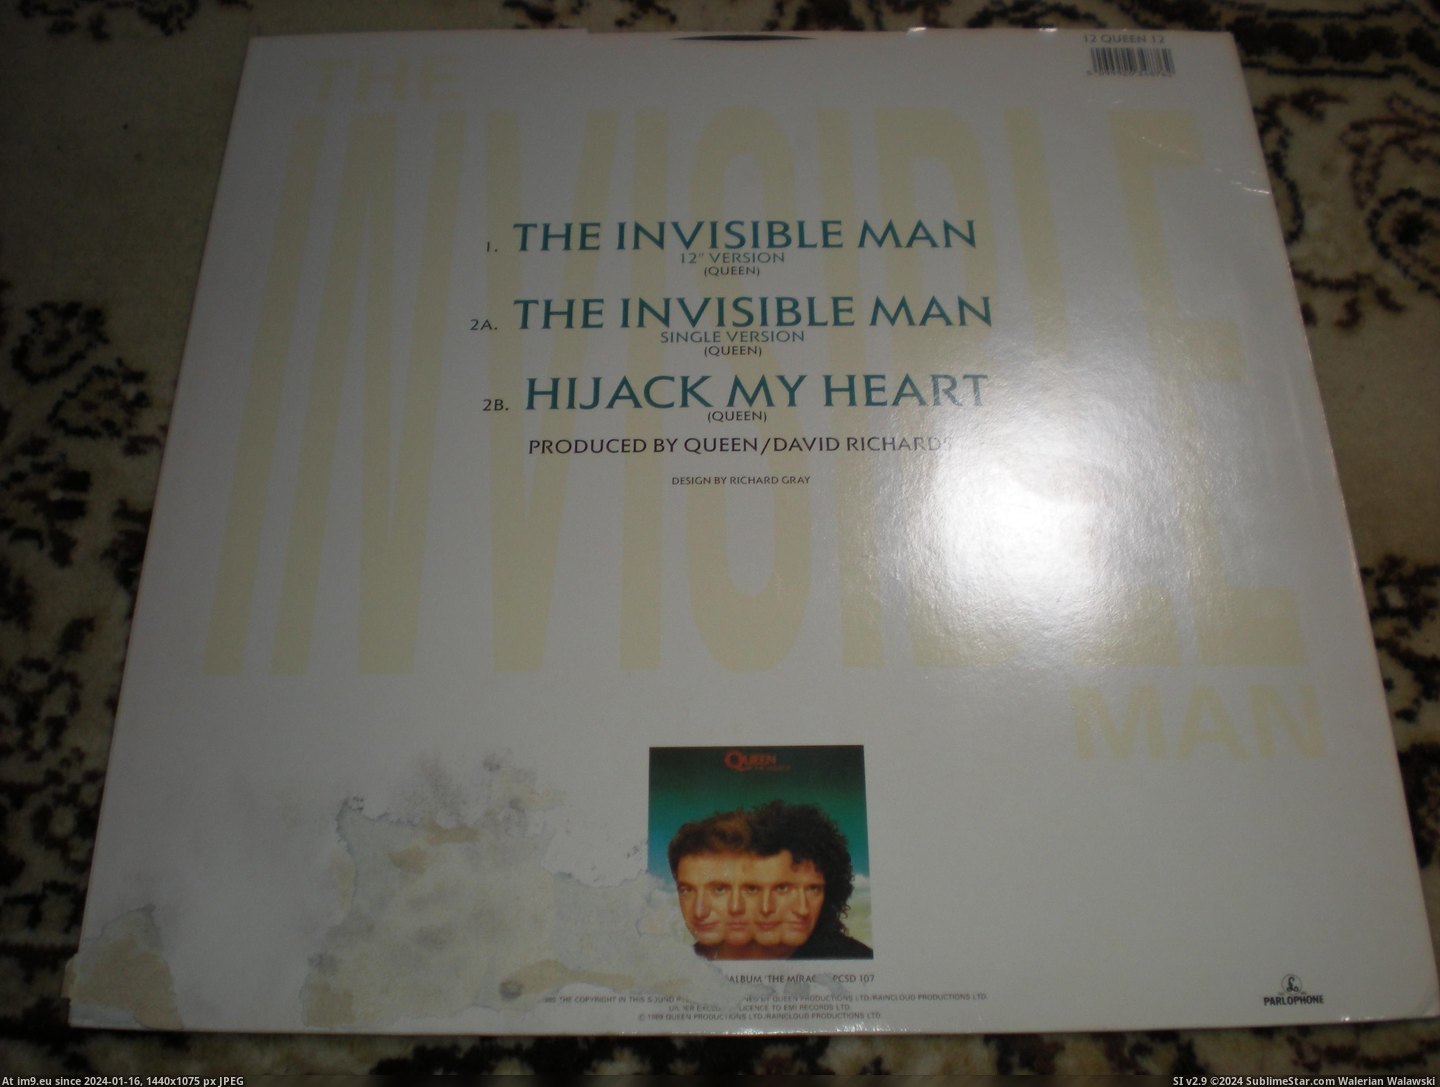 #Man #Invisible #Queen QUEEN Invisible Man 2 Pic. (Image of album new 1))